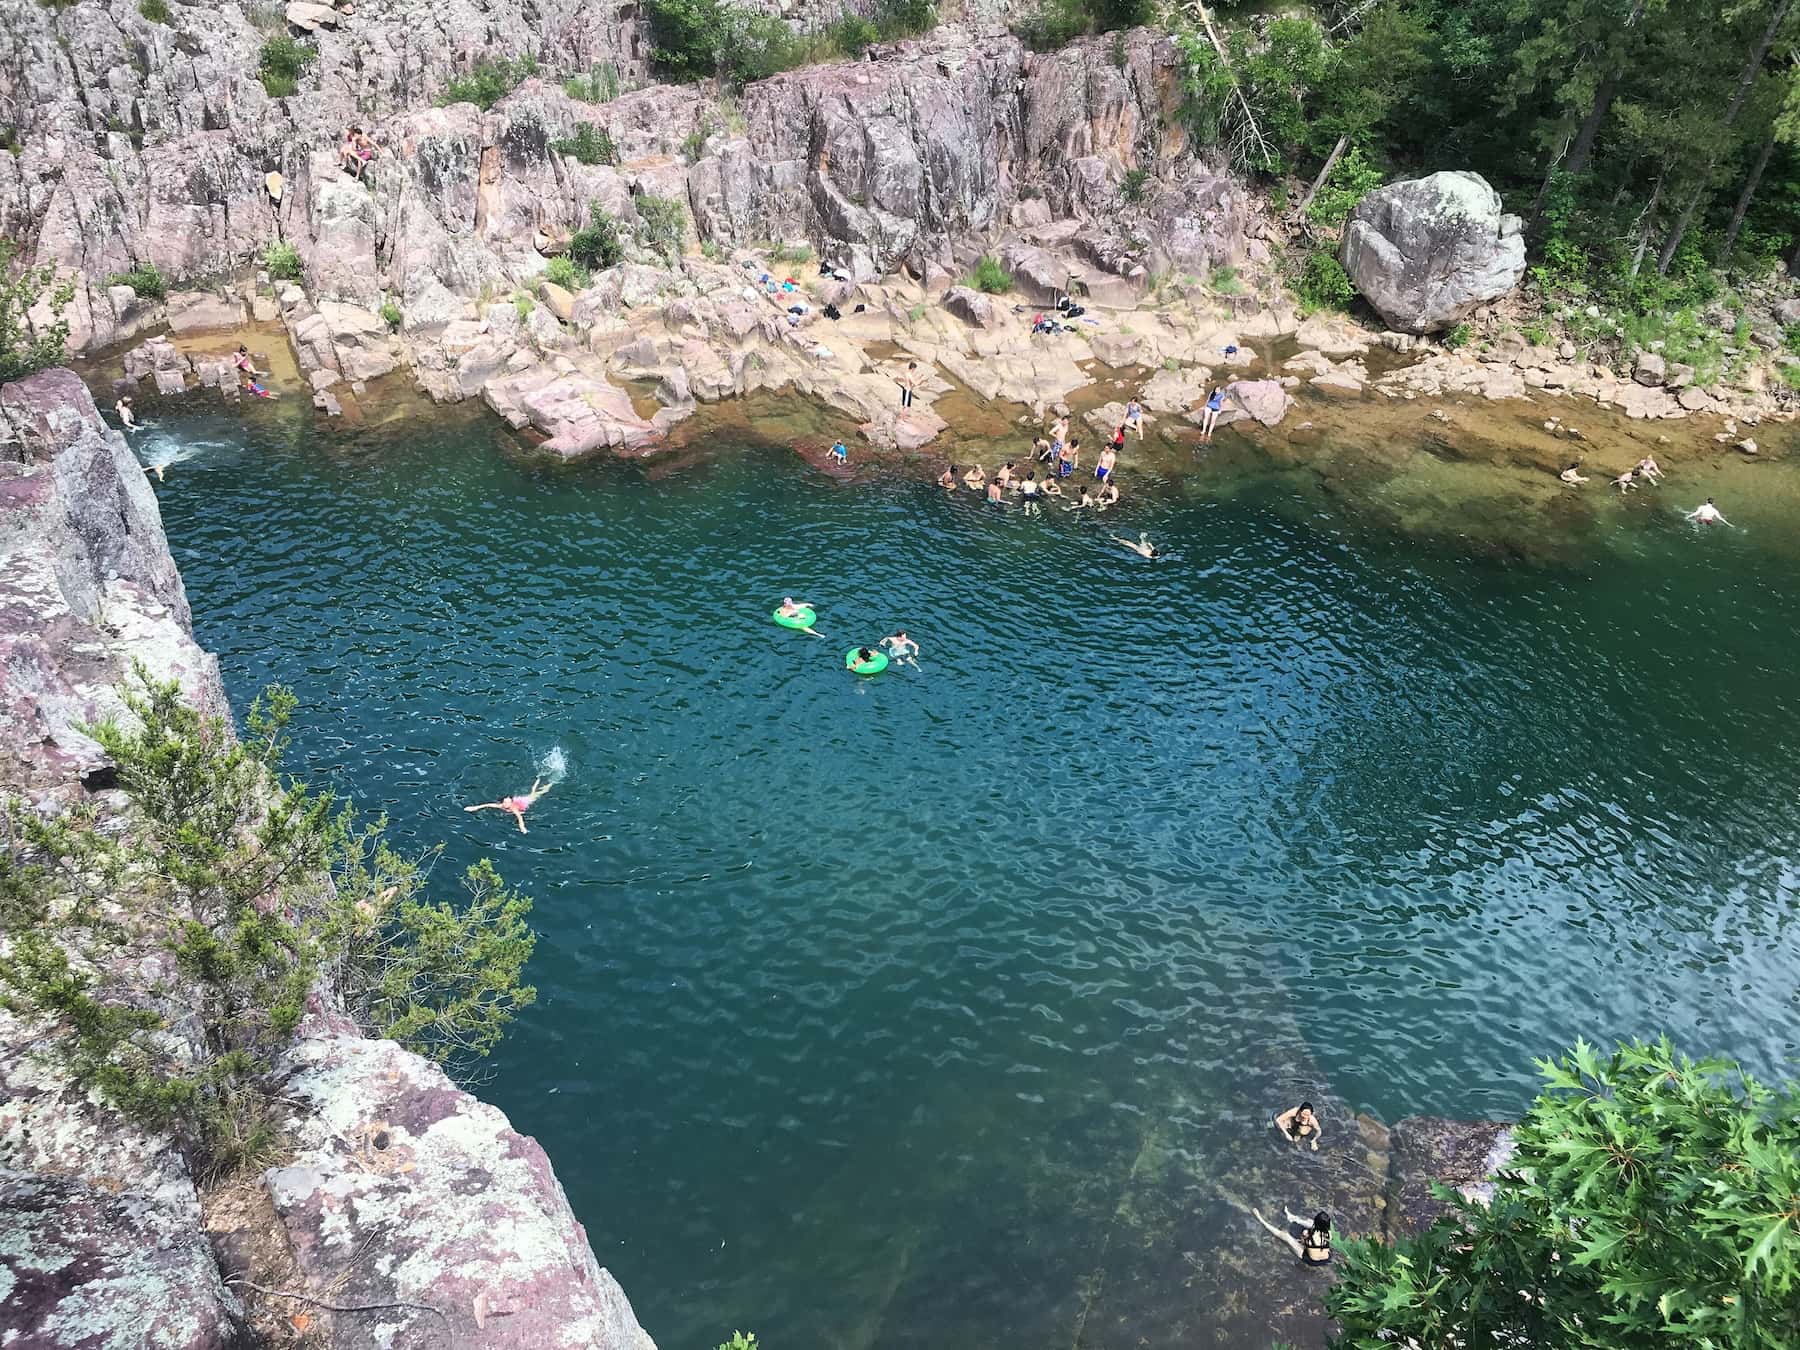 View overlooking the blue water of the Johnson Shut Ins with swimmers below.